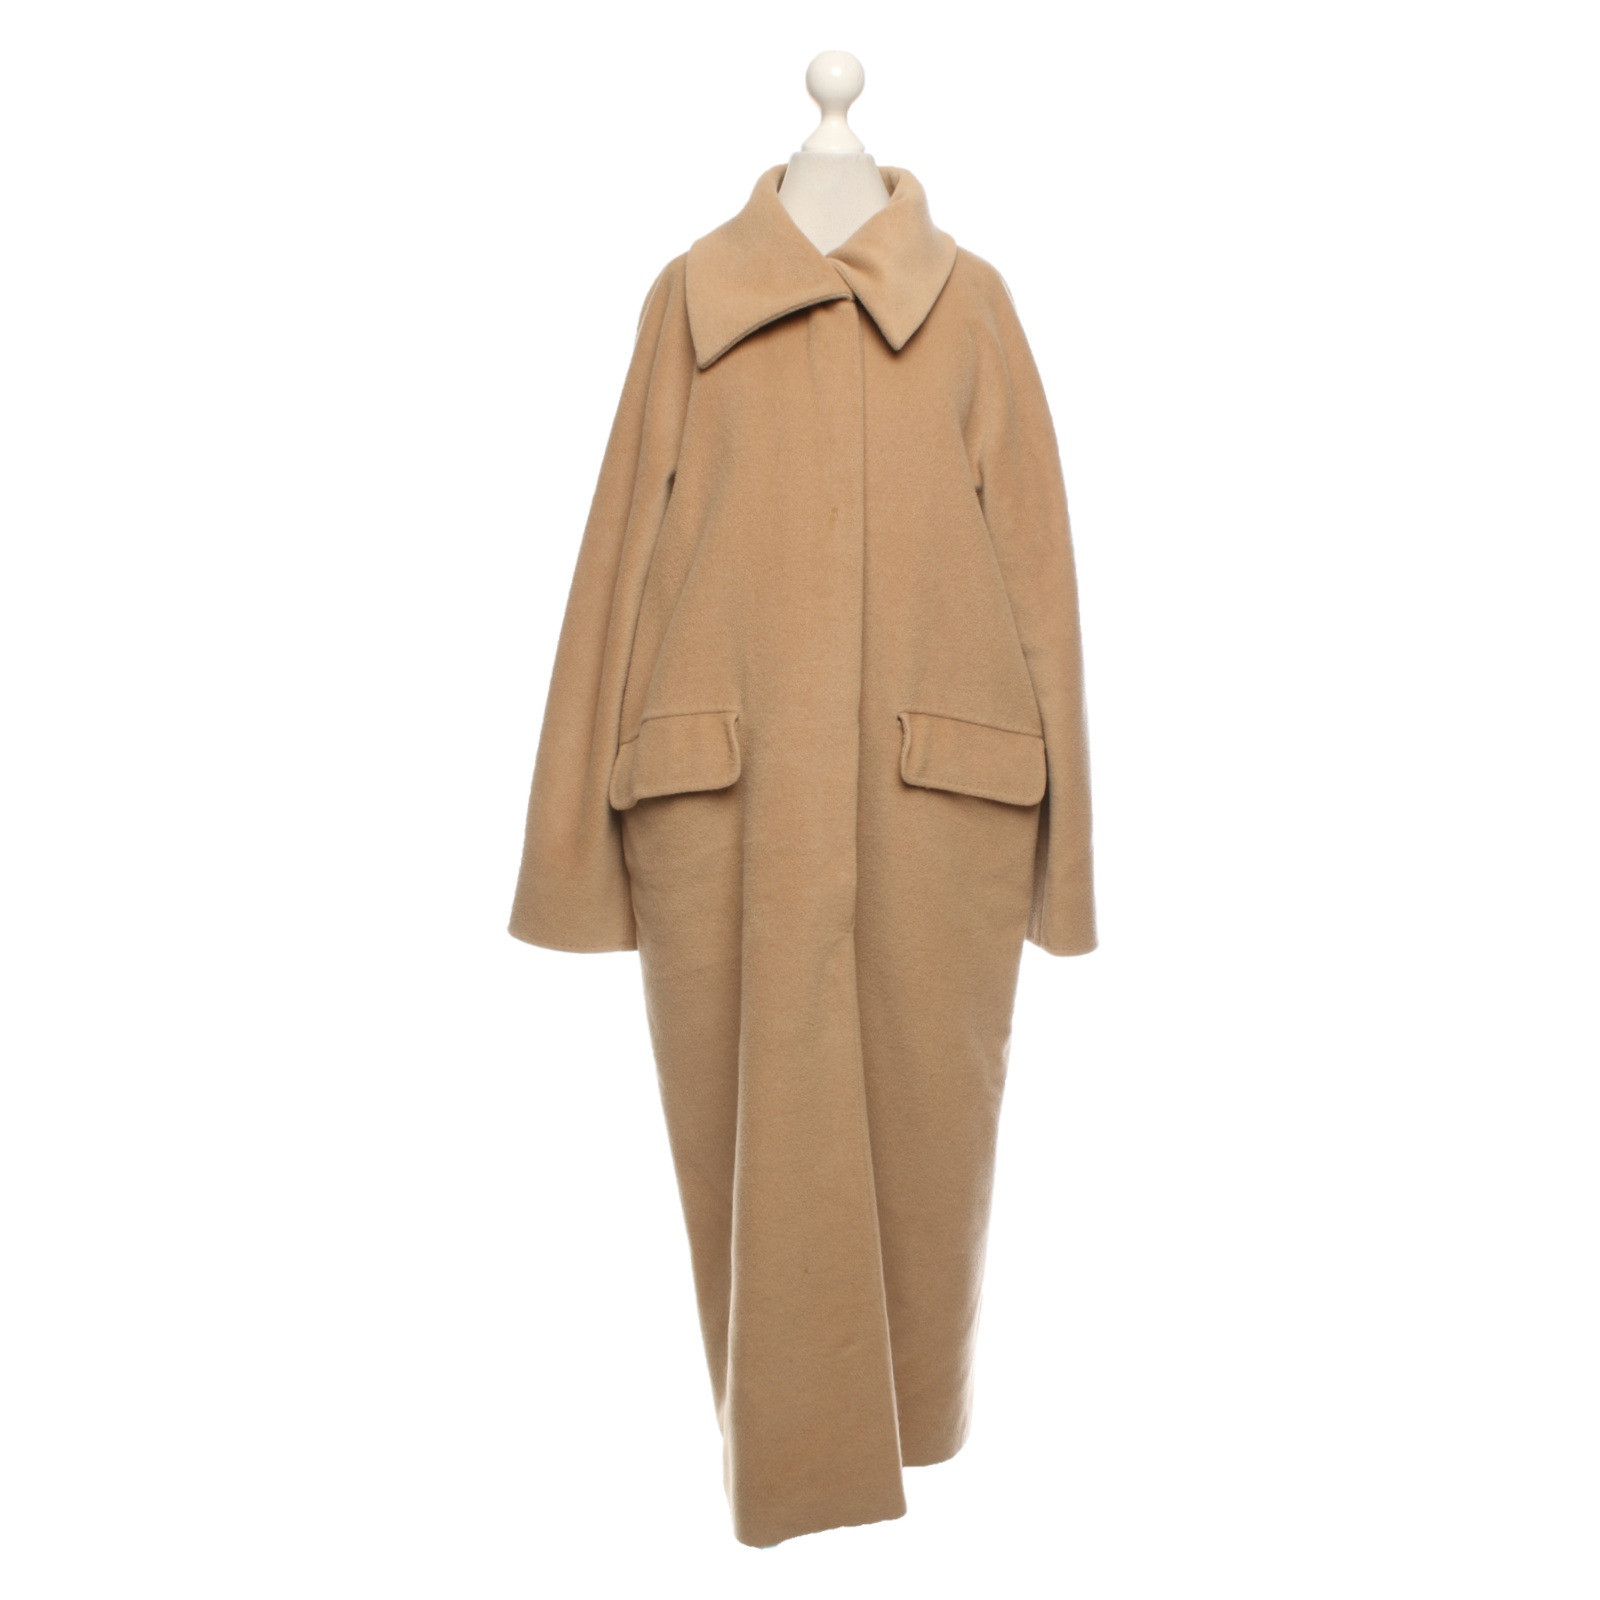 Max Mara Jacke/Mantel aus Wolle in Beige - Second Hand Max Mara Jacke/Mantel  aus Wolle in Beige buy used for 249€ (7212587)